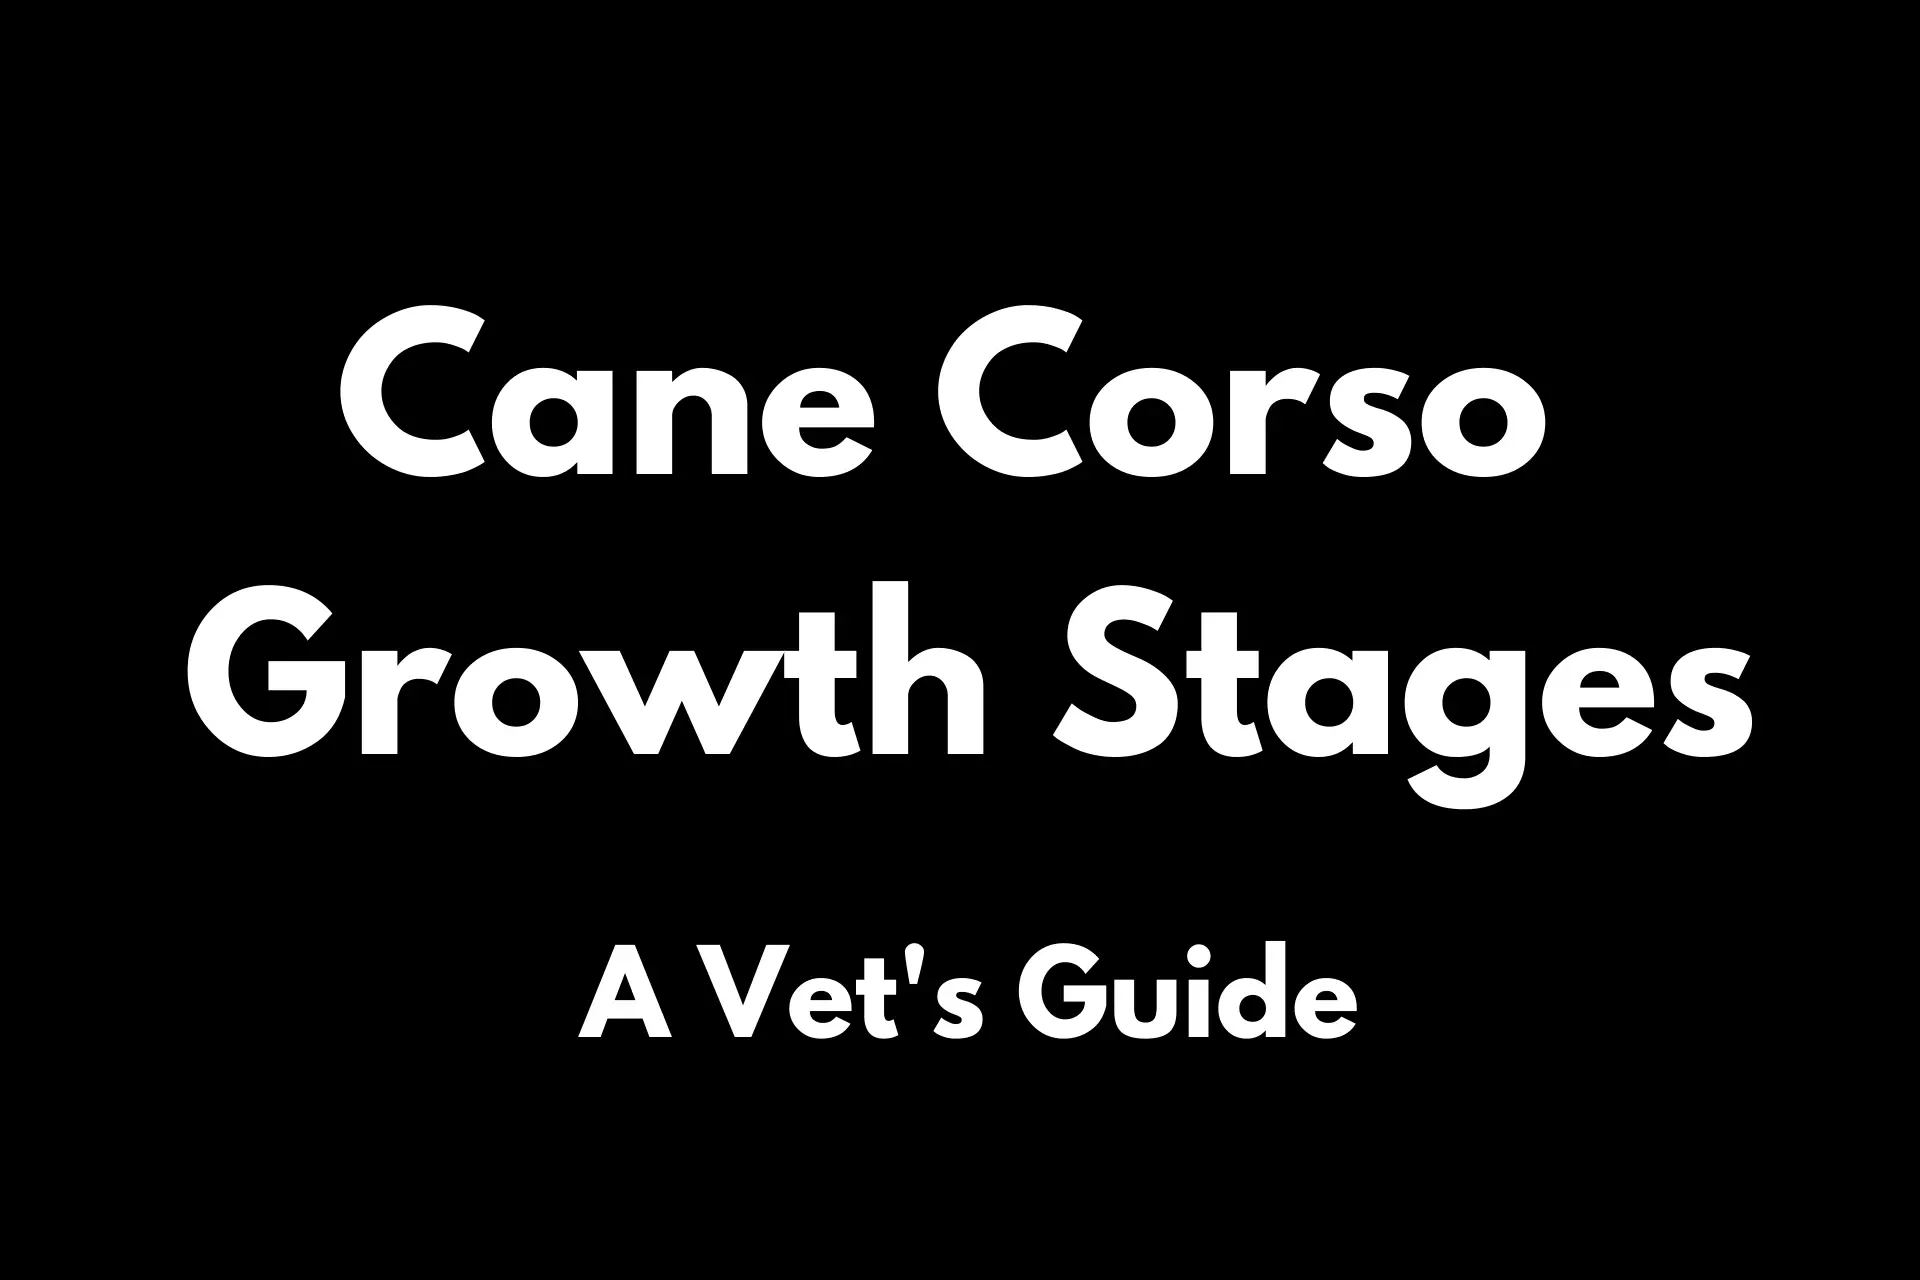 Cane Corso Growth Stages